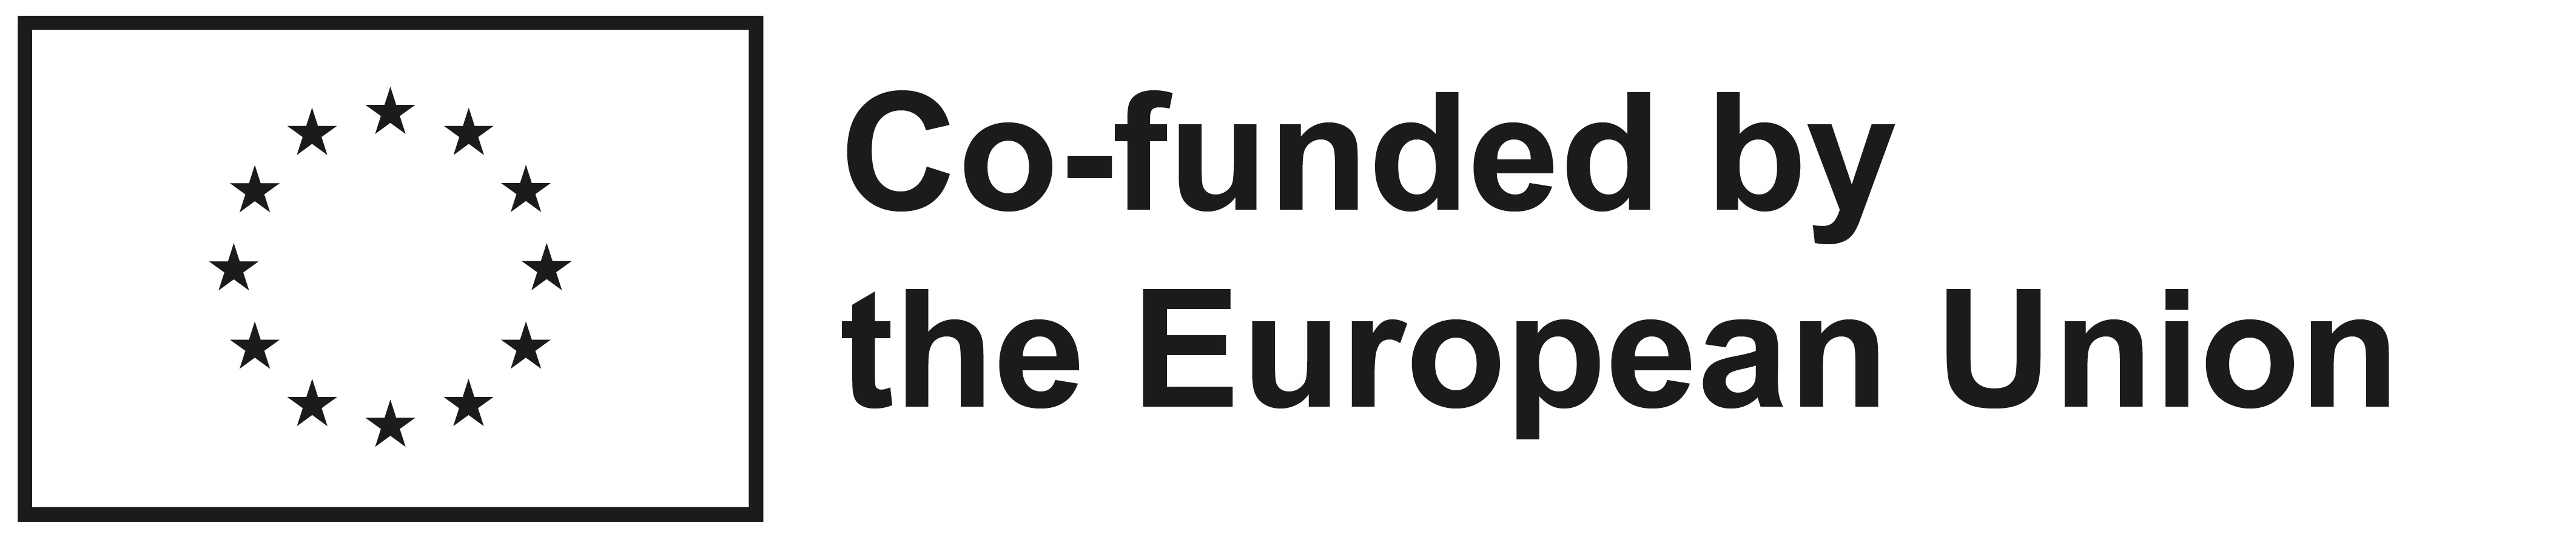 co funded by EU